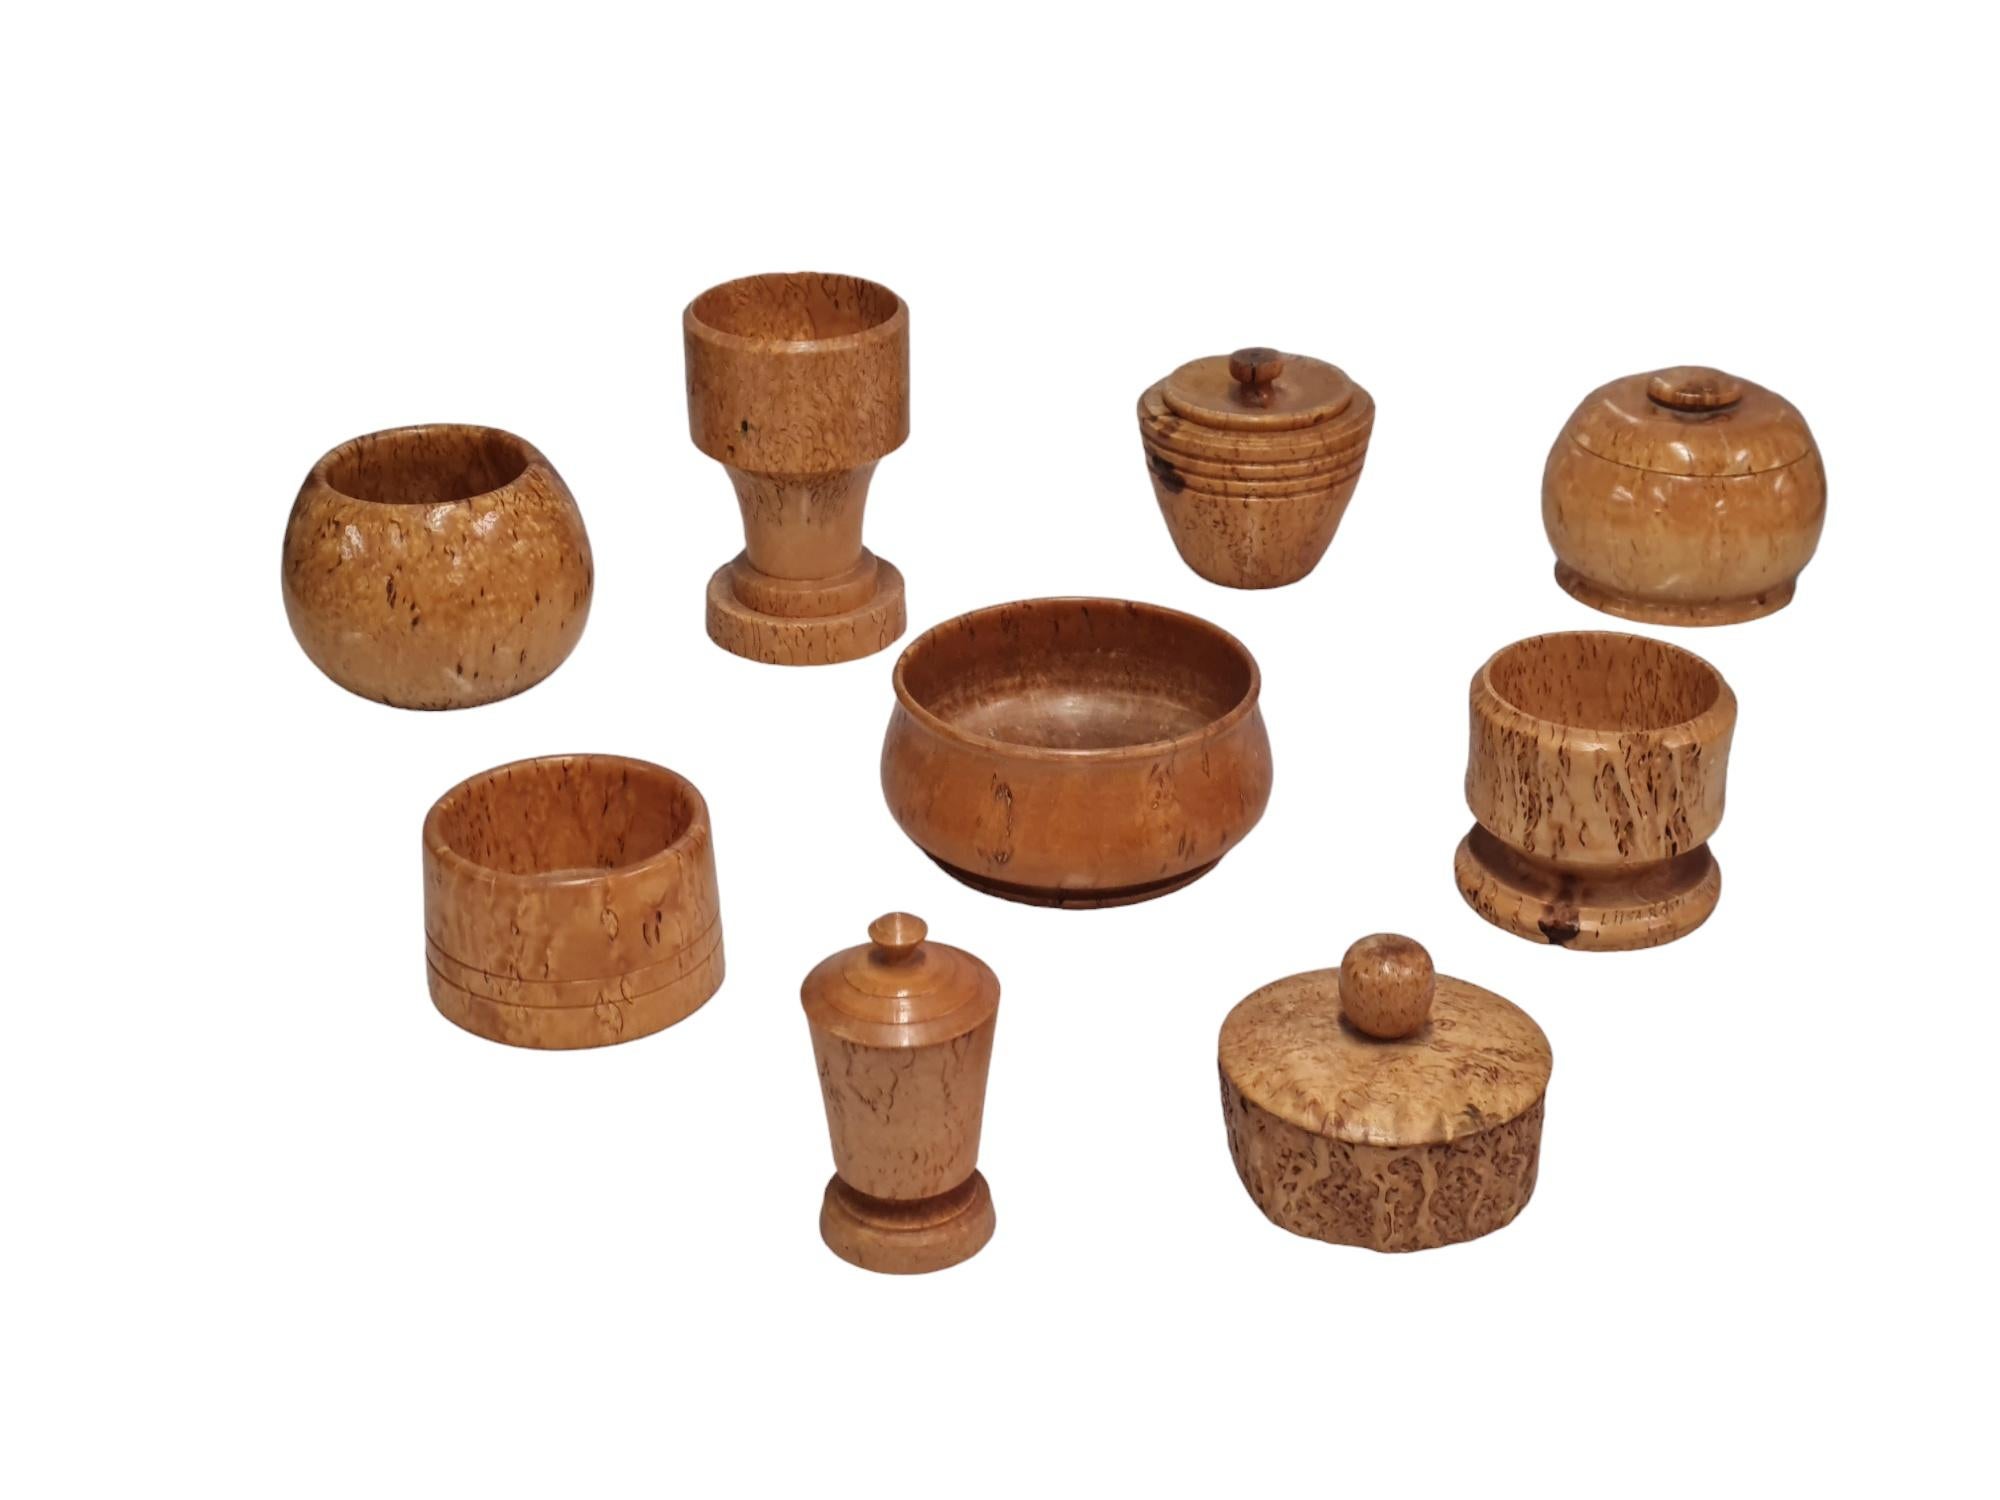 A beautiful set of 9 unique curly birch bowls/objects, also known as silver birch boxes and bowls. Curly birch is a rare variety of birch that occurs naturally in Finland and is highly appreciated for its beautiful patterns in the wood, and is